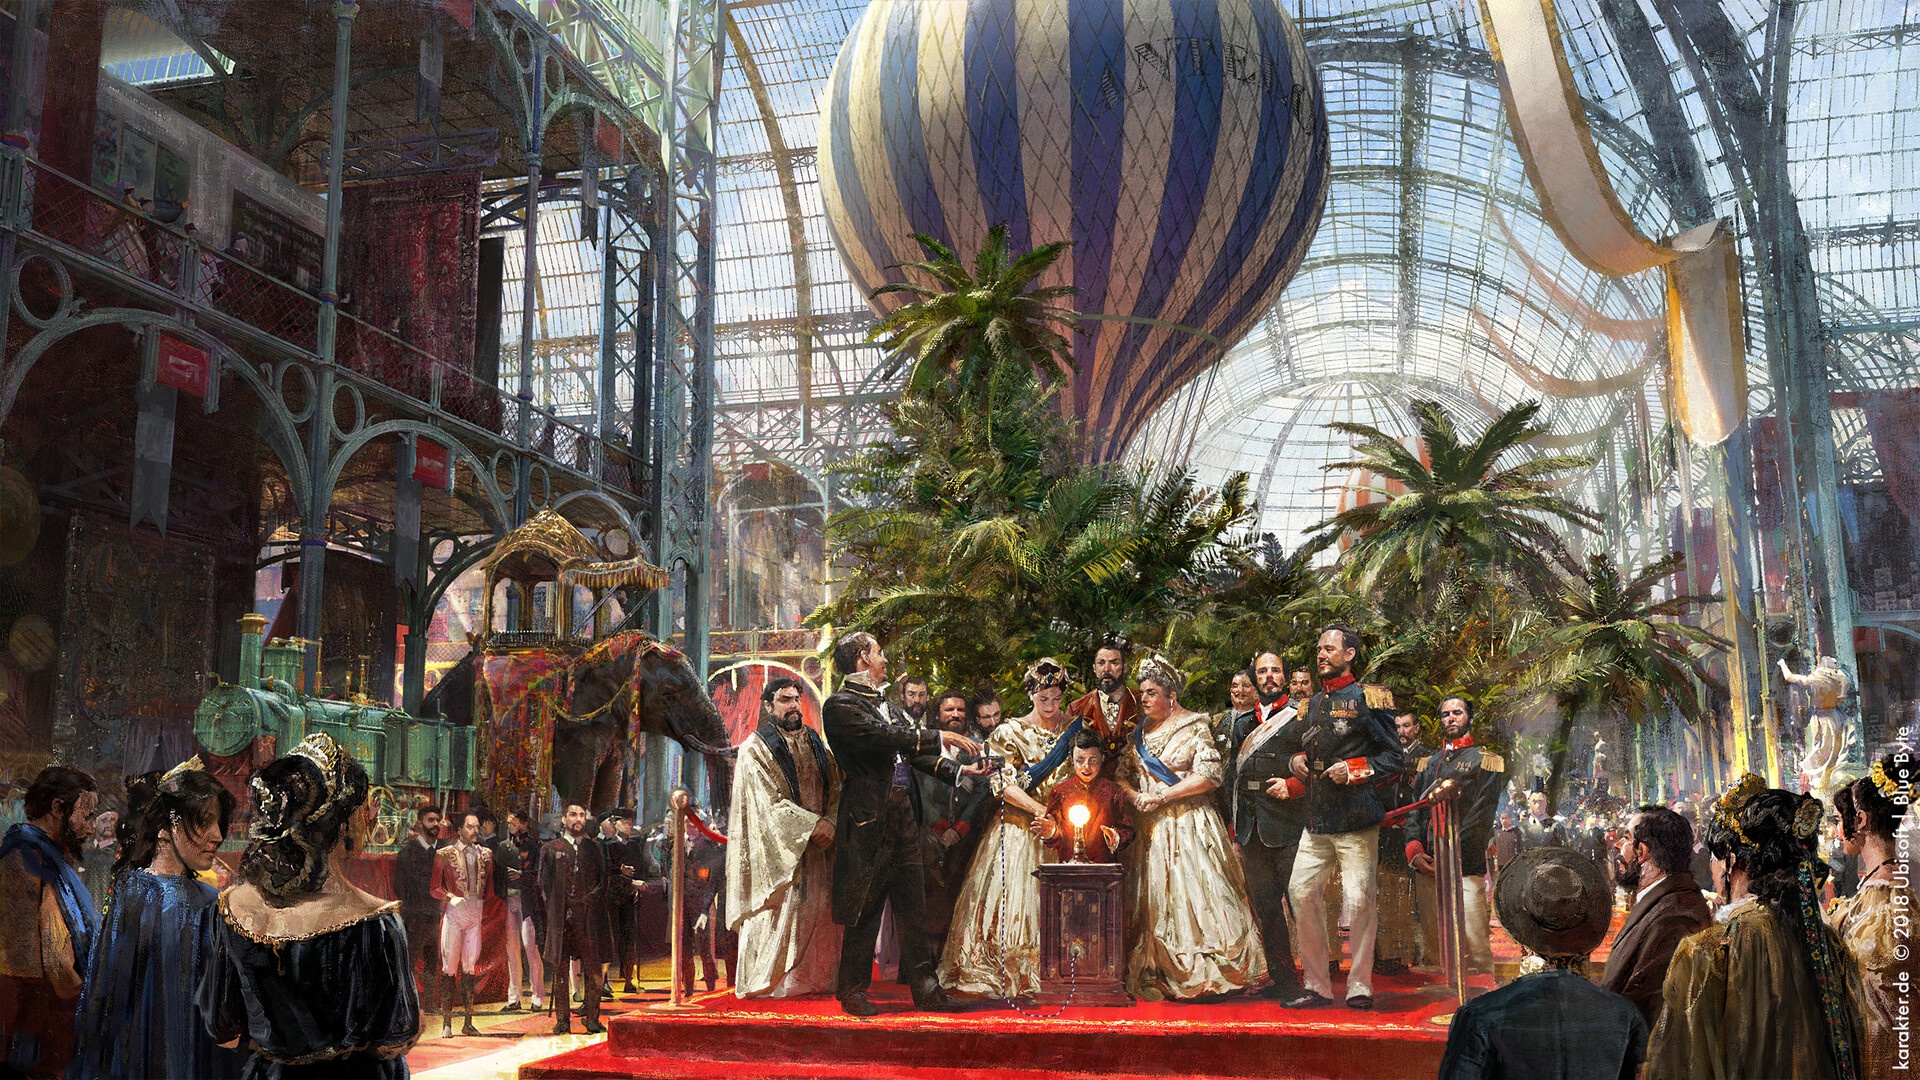 Digital Art Victorian Architecture Painting Hot Air Balloons Crowds Anno 1800 Video Games Video Game 1920x1080